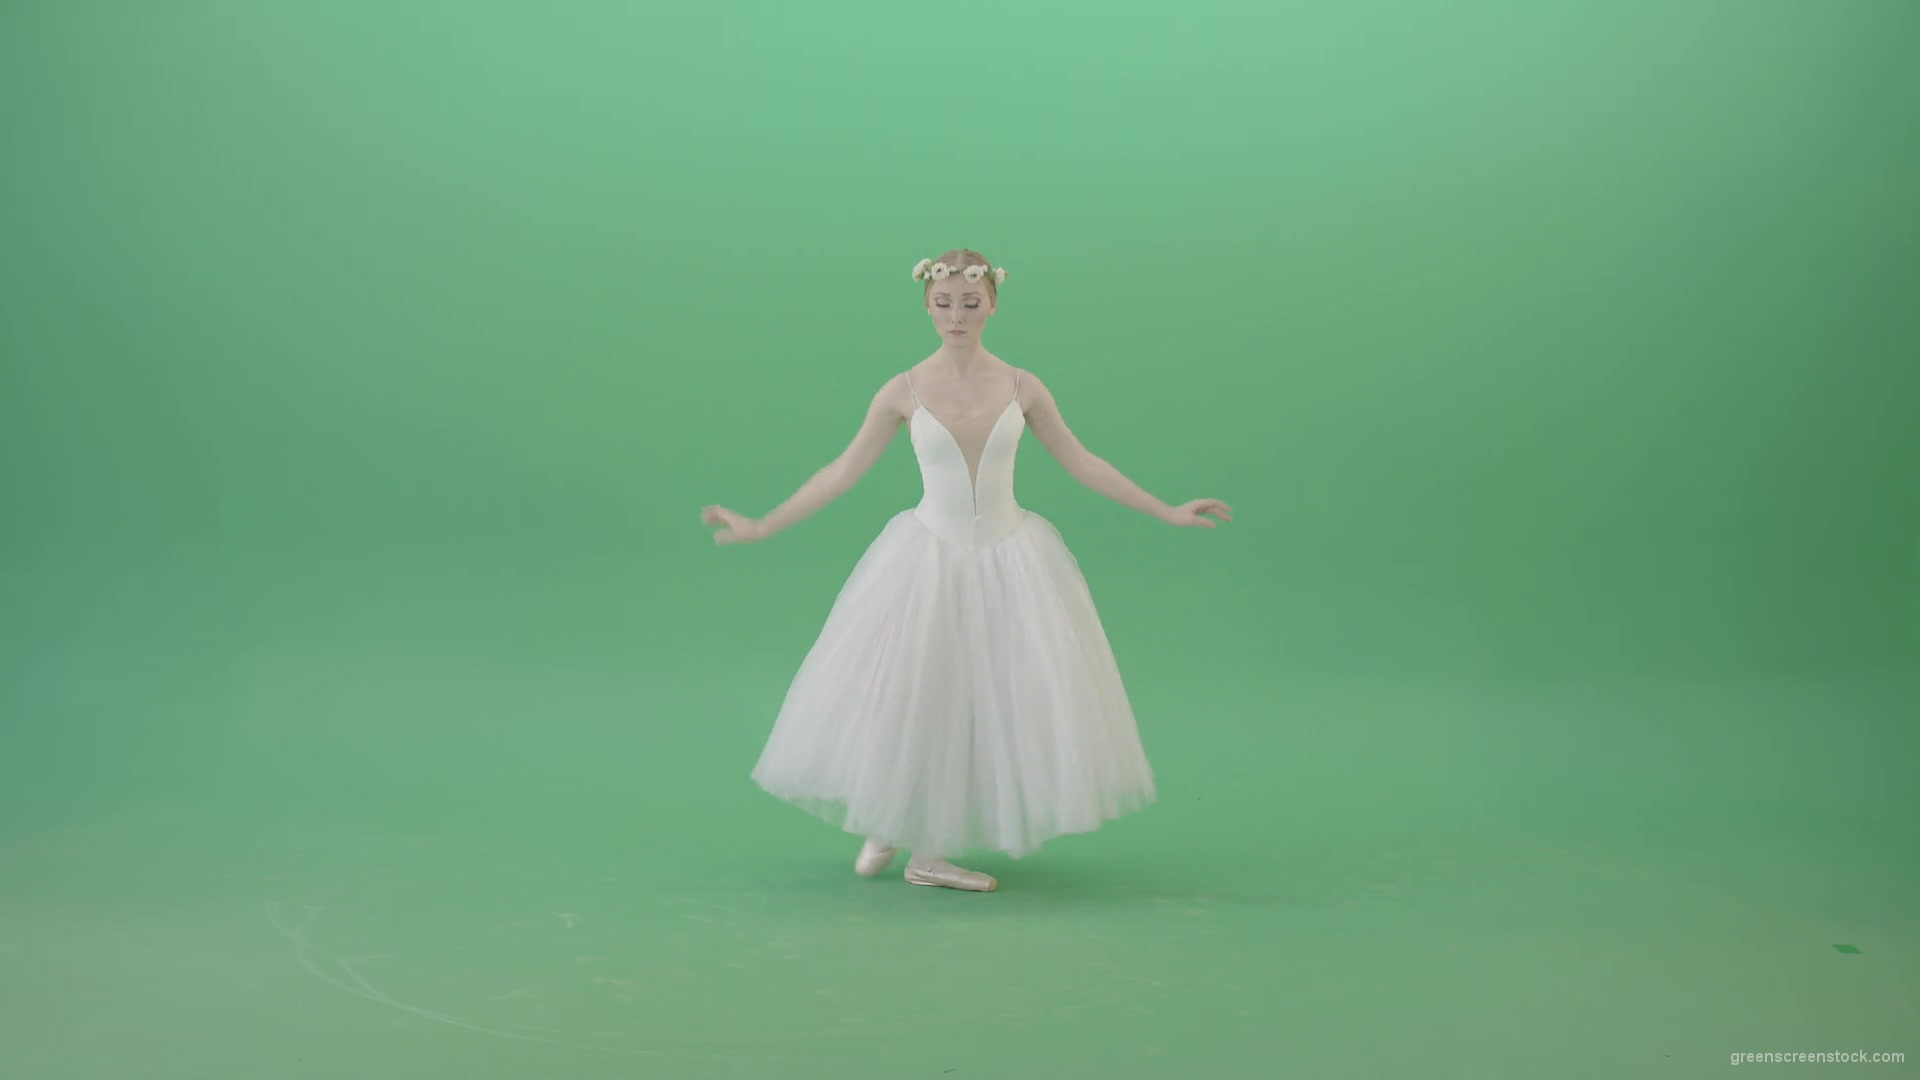 Ballet-Art-Princes-making-royal-regards-in-white-wedding-dress-isolated-on-green-screen-4K-Video-Footage-1920_002 Green Screen Stock